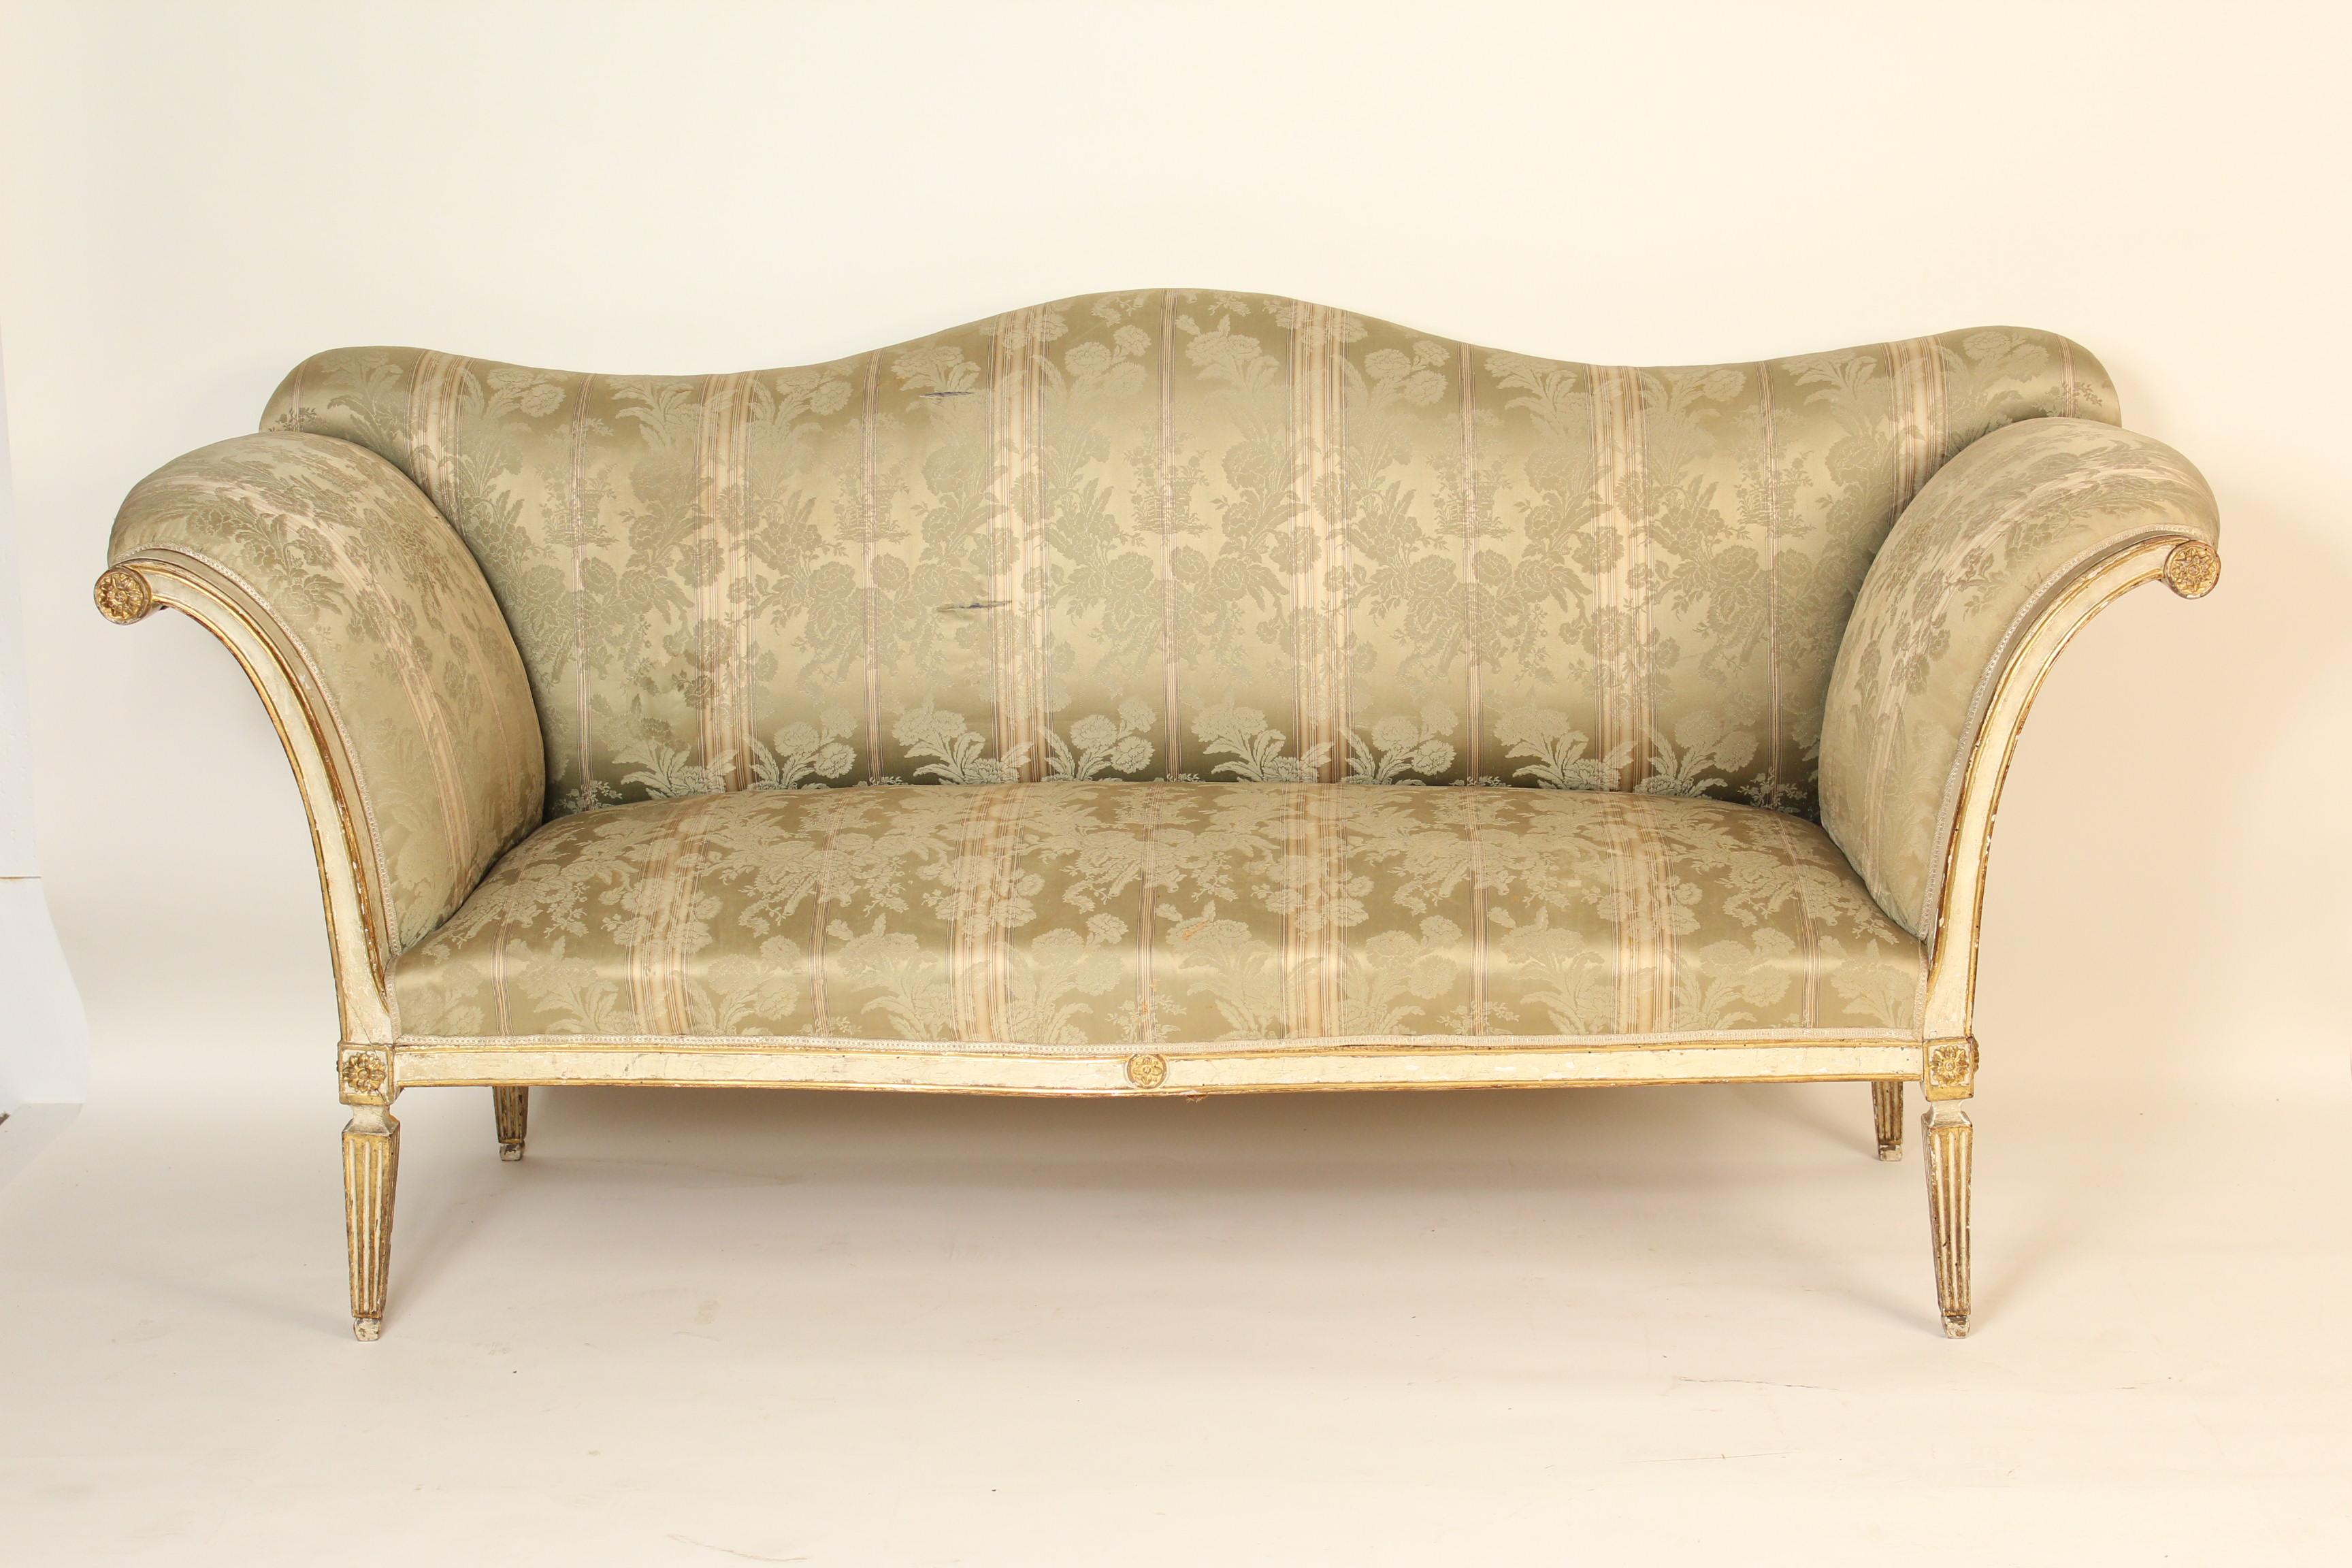 Antique continental Louis XVI style painted and parcel-gilt settee with a camel back and rolled arms, 19th century.